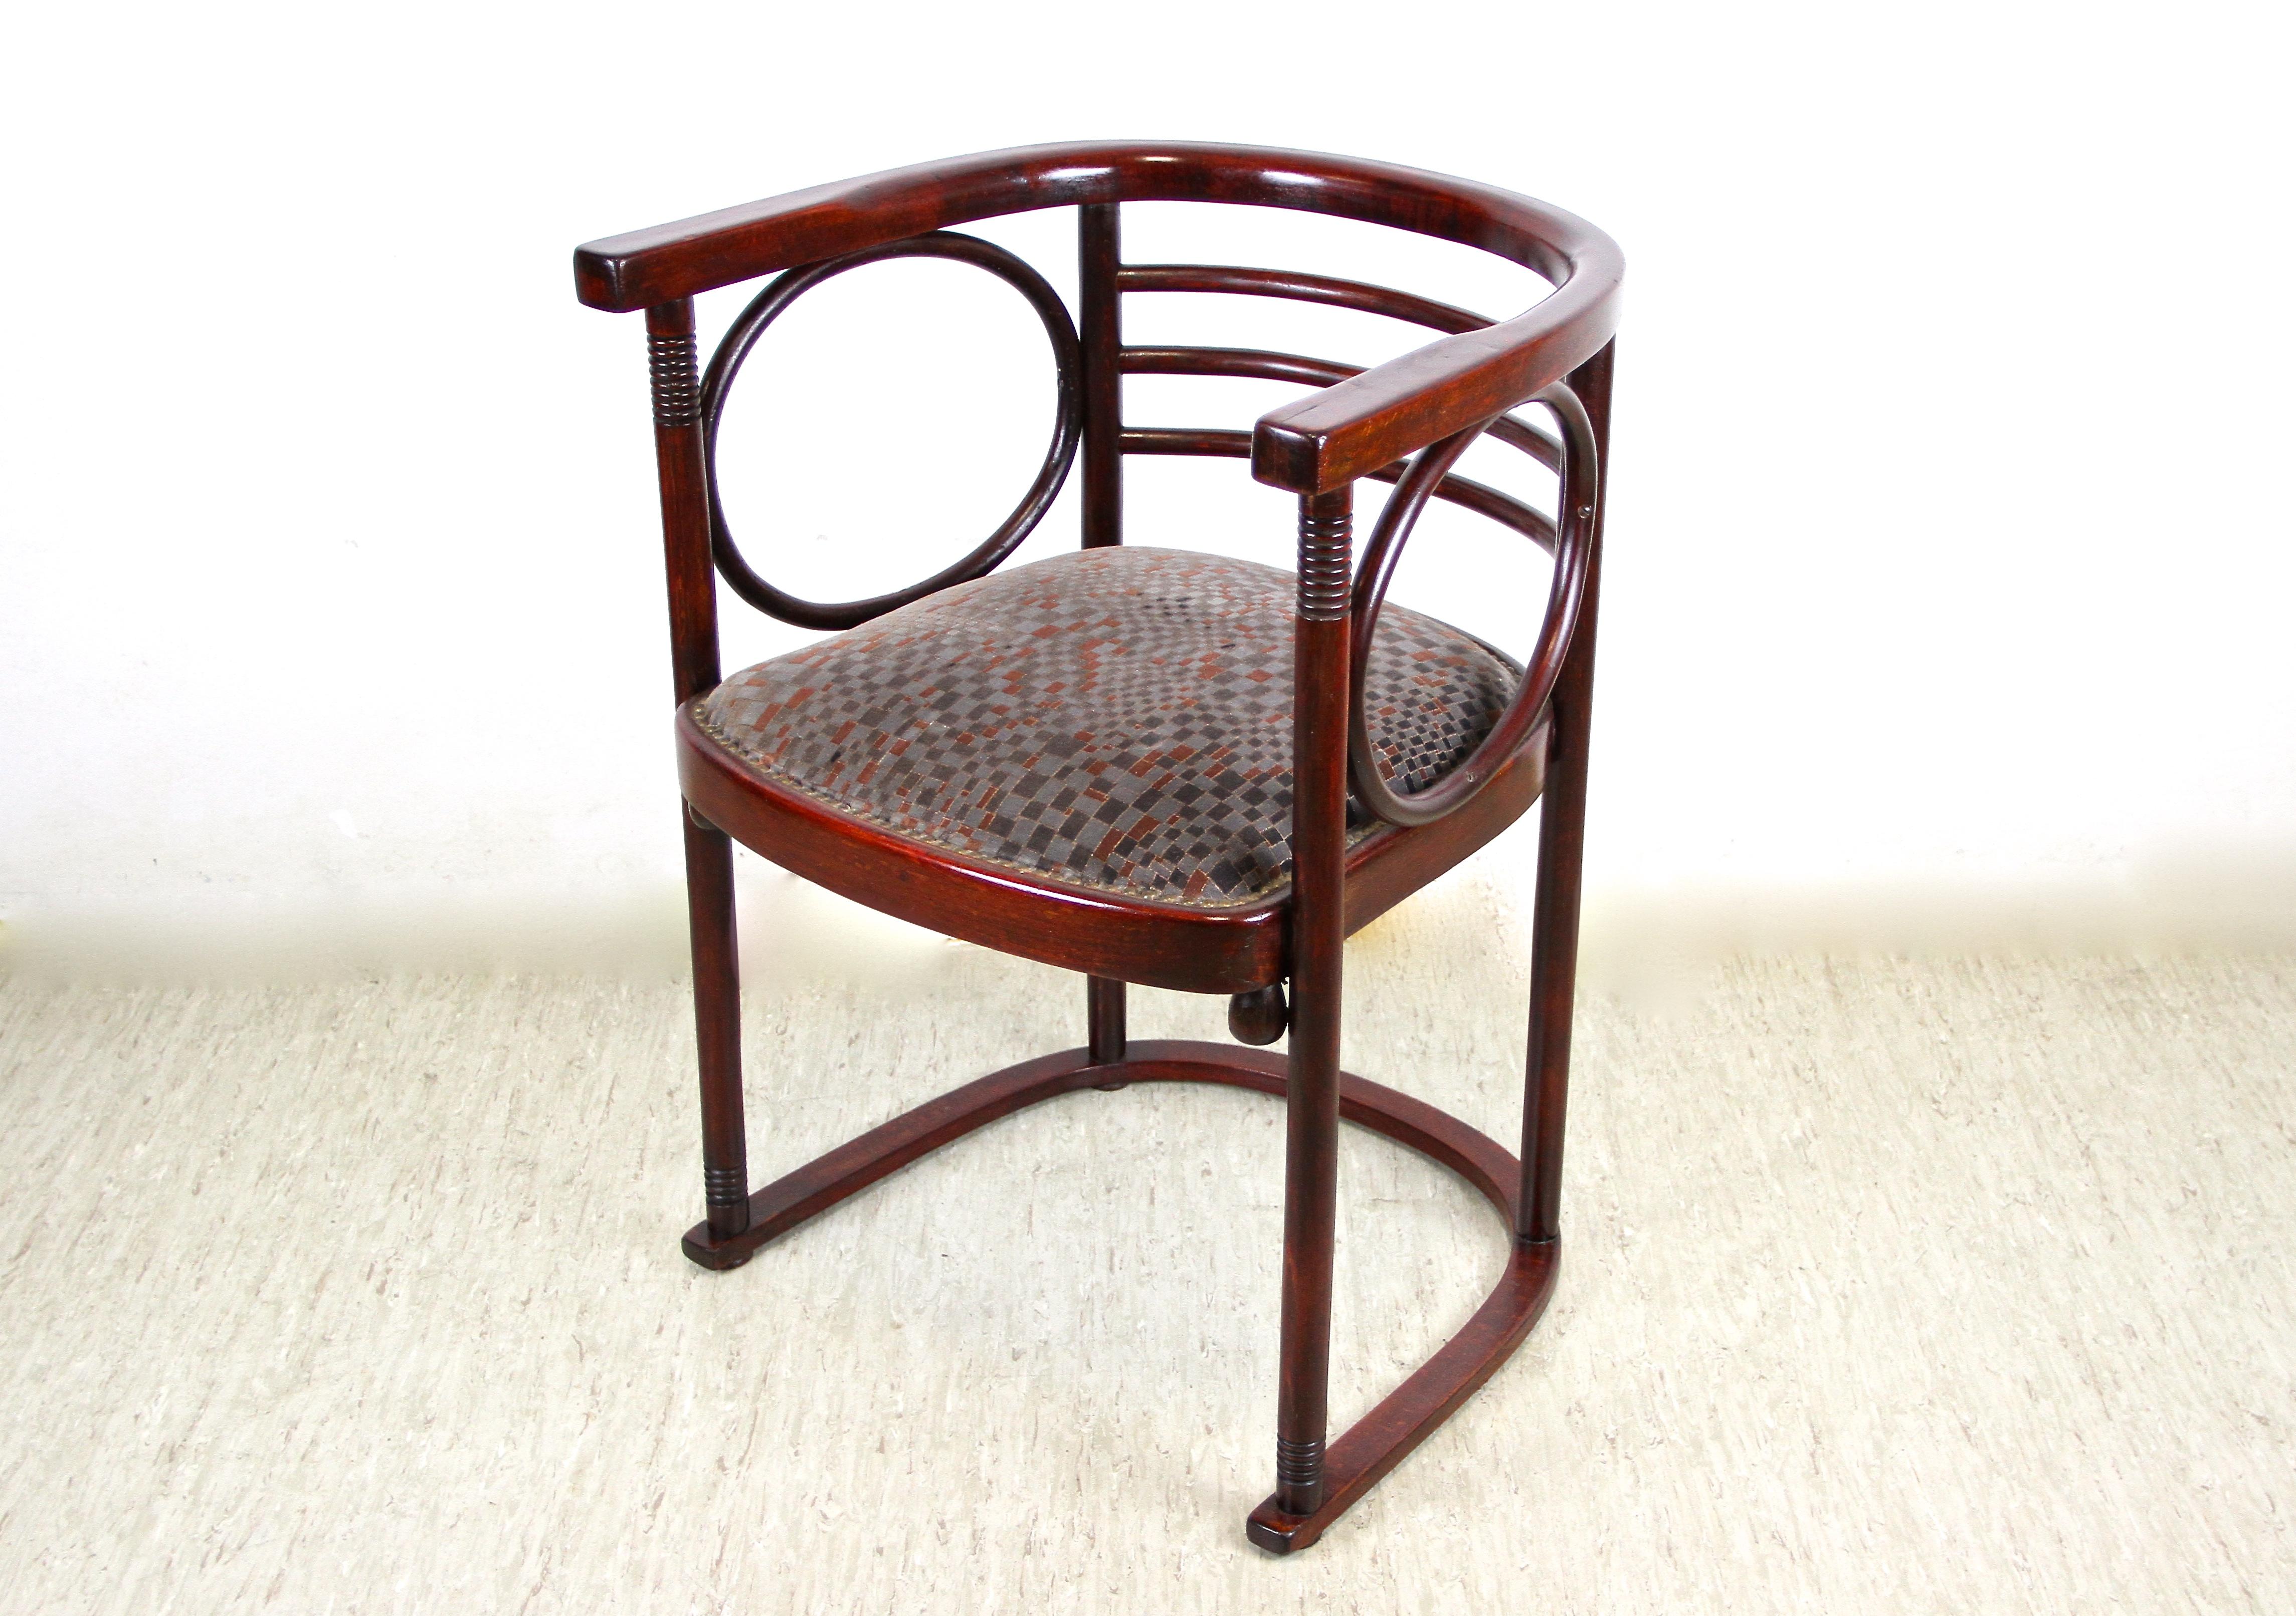 Remarkable Art Nouveau Bentwood Armchair made around 1905 by the renown company of Thonet in Austria. The gorgeous 